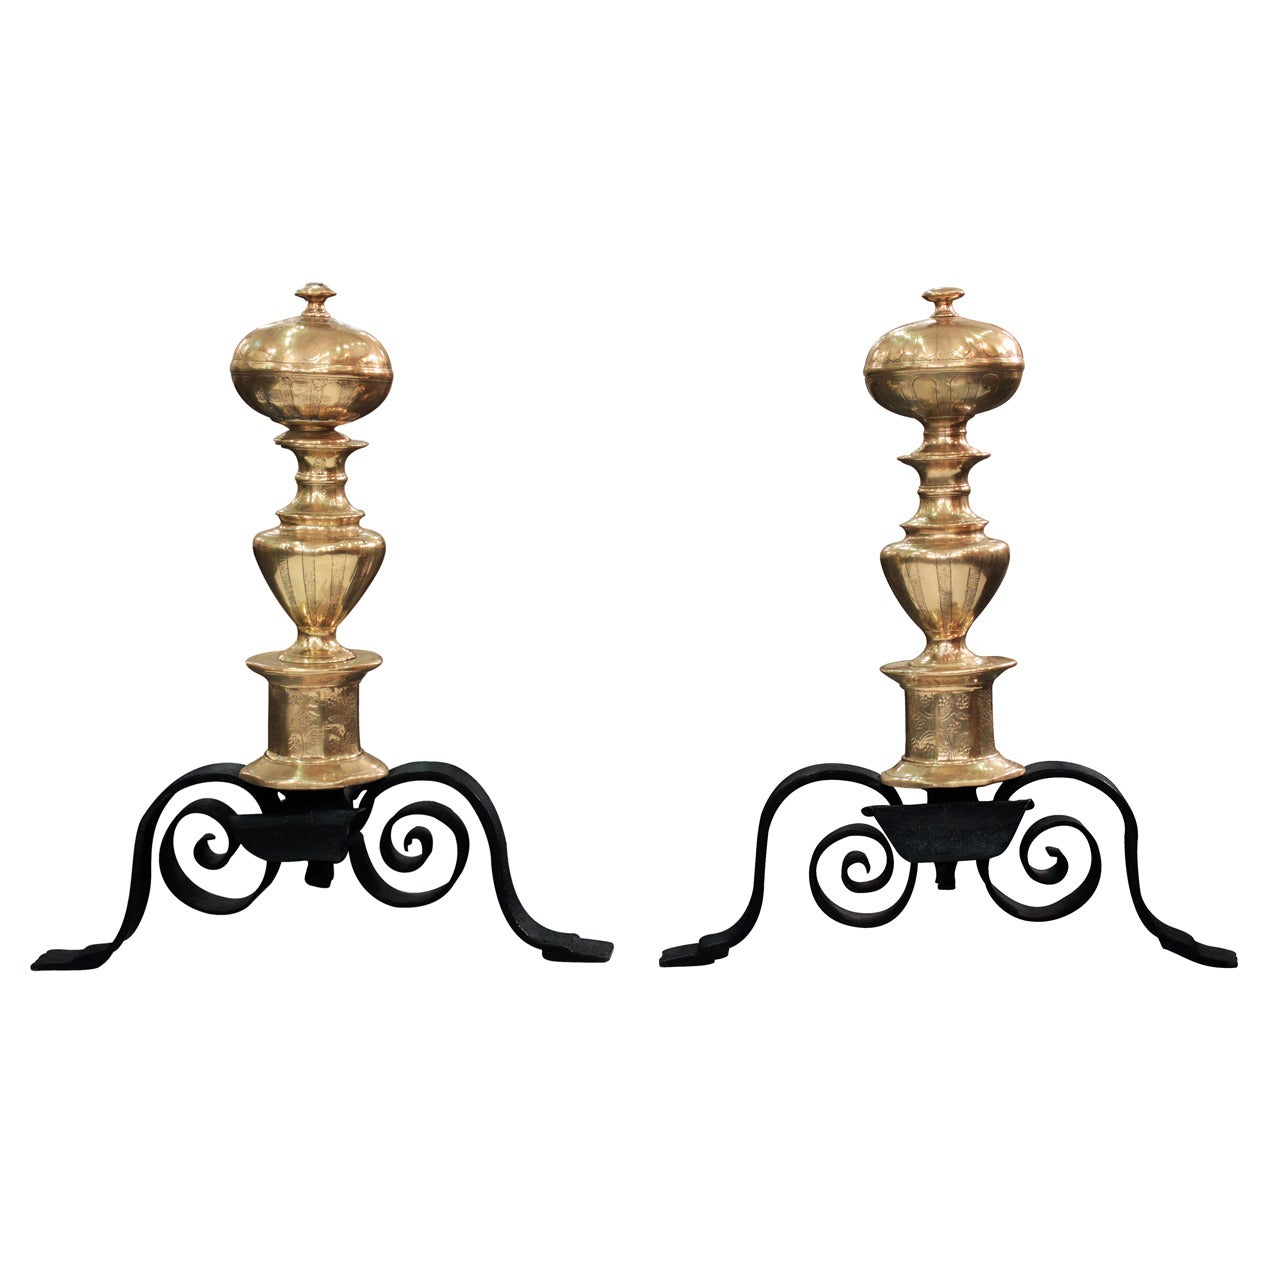 Pair of Large Andirons in Polished Brass